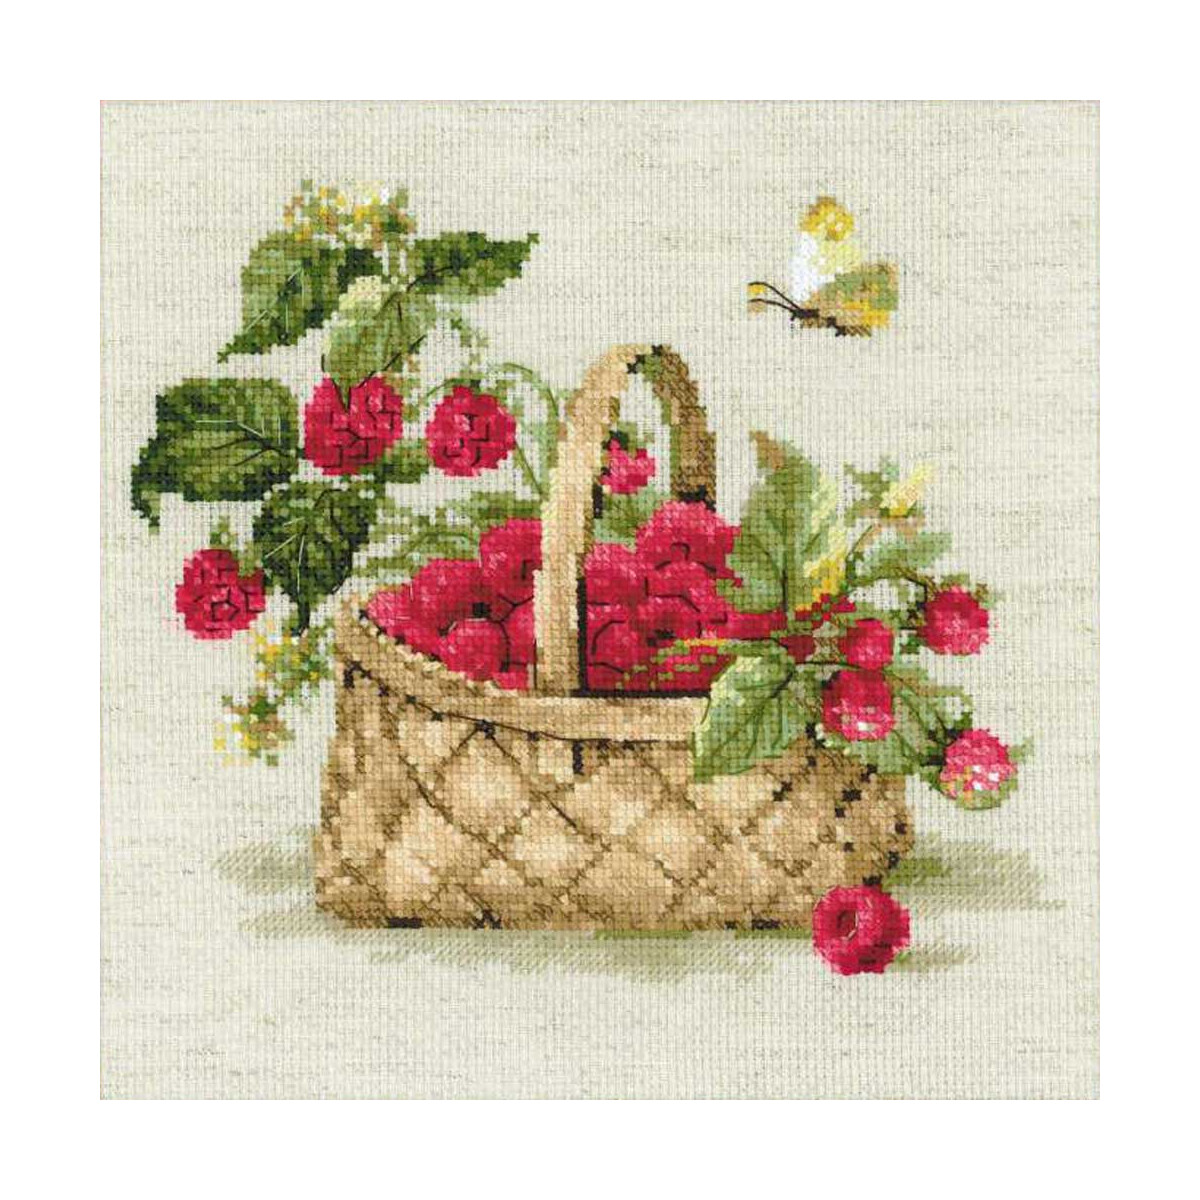 Riolis counted cross stitch Kit Basket with Raspberries, DIY